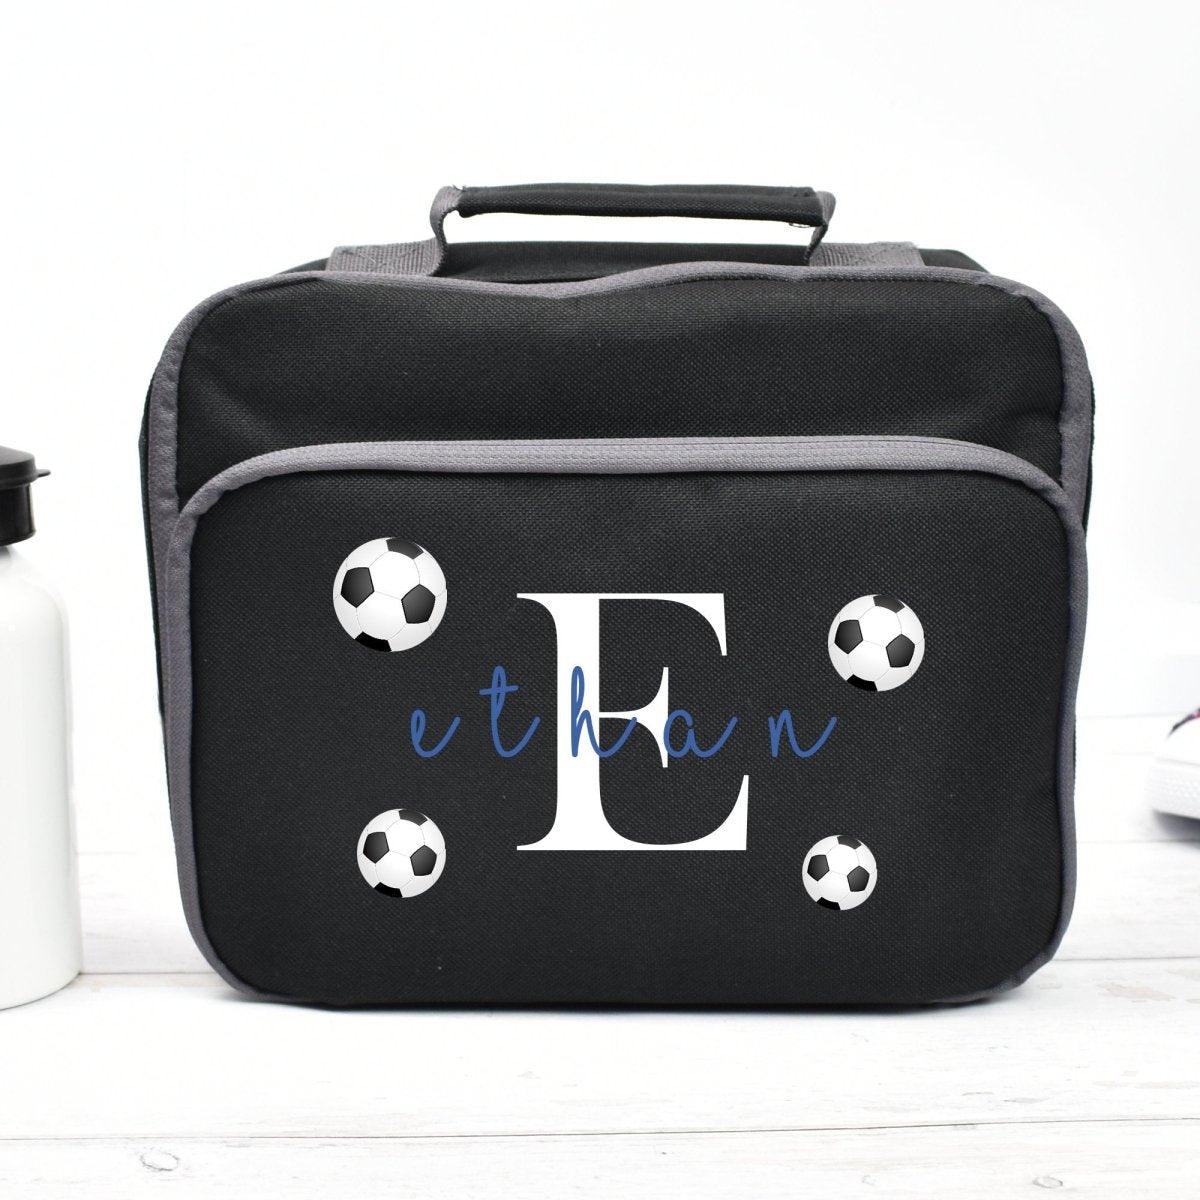 Personalised Football Lunch Bag, Football School Lunch Bag, Kids Football Cooler Bag, Boys School Lunch Bag Children Student, Back To School - Amy Lucy